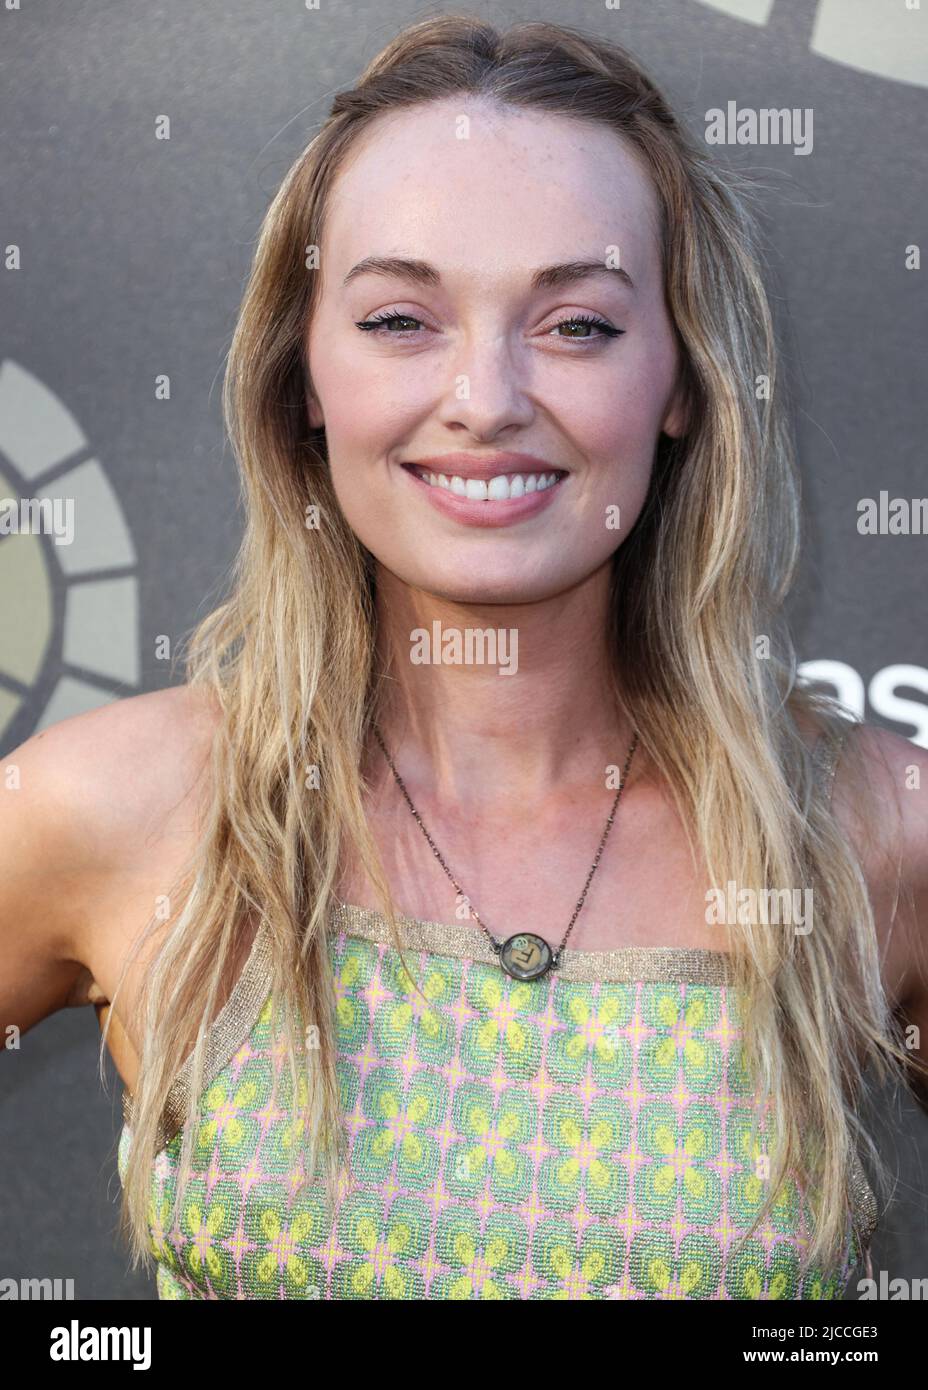 UNIVERSAL CITY, LOS ANGELES, CALIFORNIA, USA - JUNE 11: Irish actress Elva Trill arrives at the Charlize Theron Africa Outreach Project (CTAOP) 2022 Summer Block Party held at Universal Studios Backlot on June 11, 2022 in Universal City, Los Angeles, California, United States. (Photo by Xavier Collin/Image Press Agency) Stock Photo